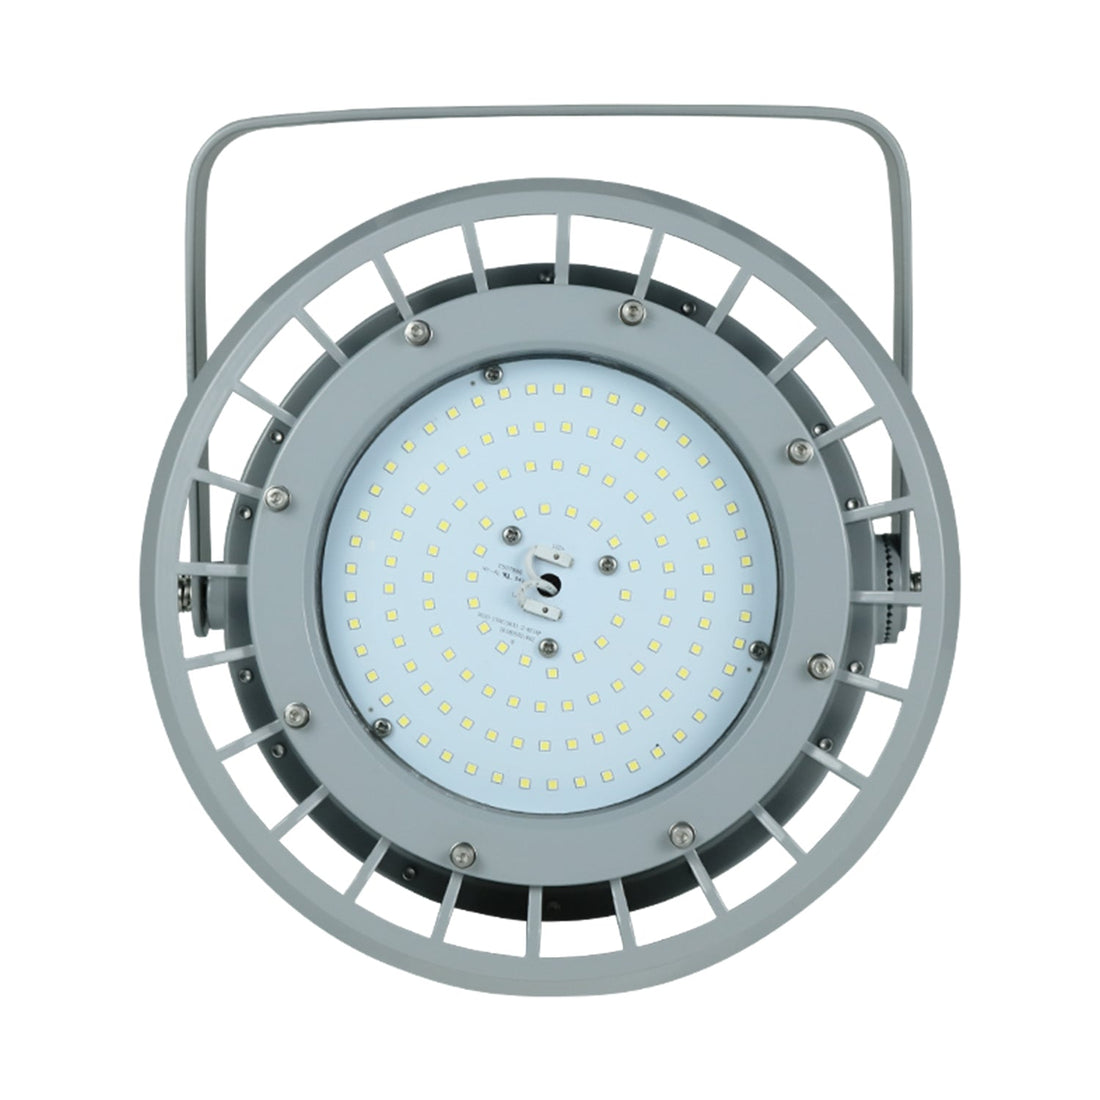 B Series 60W Dimmable LED Explosion Proof Round High Bay Light - 5000K, 8400LM, IP66 Rated for Hazardous Locations